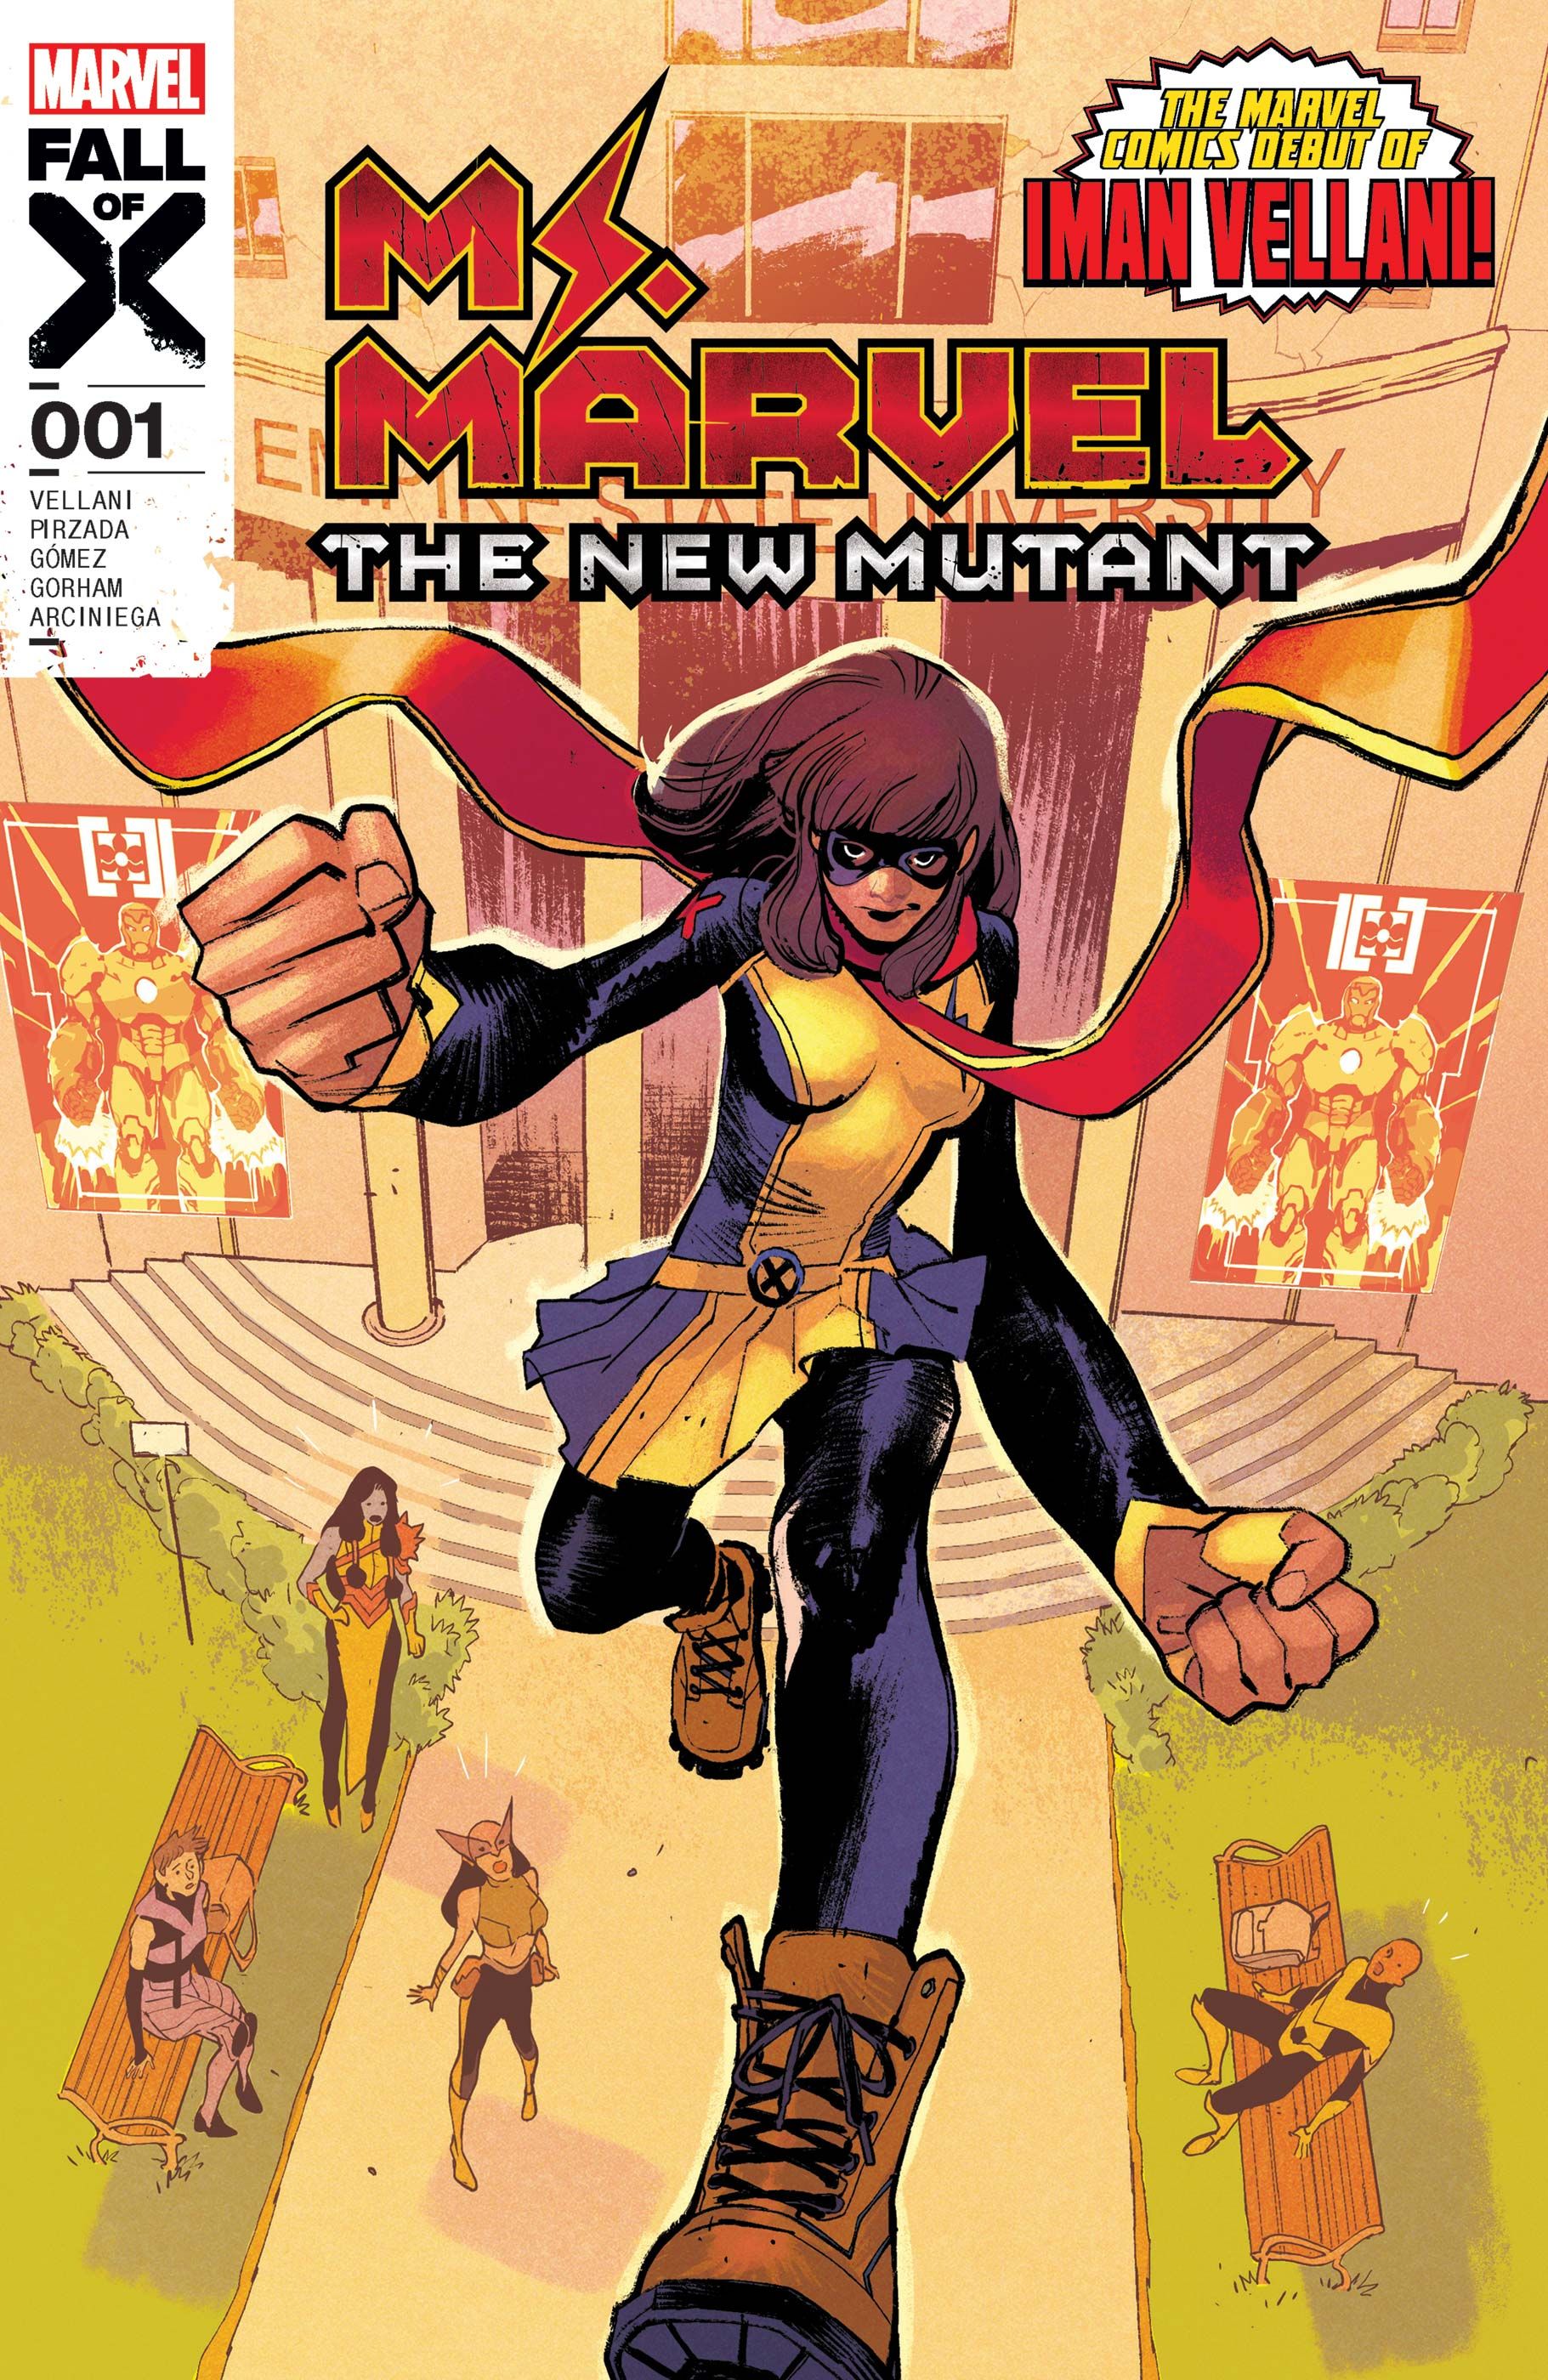 Ms. Marvel largely striding out of the entrance to a college